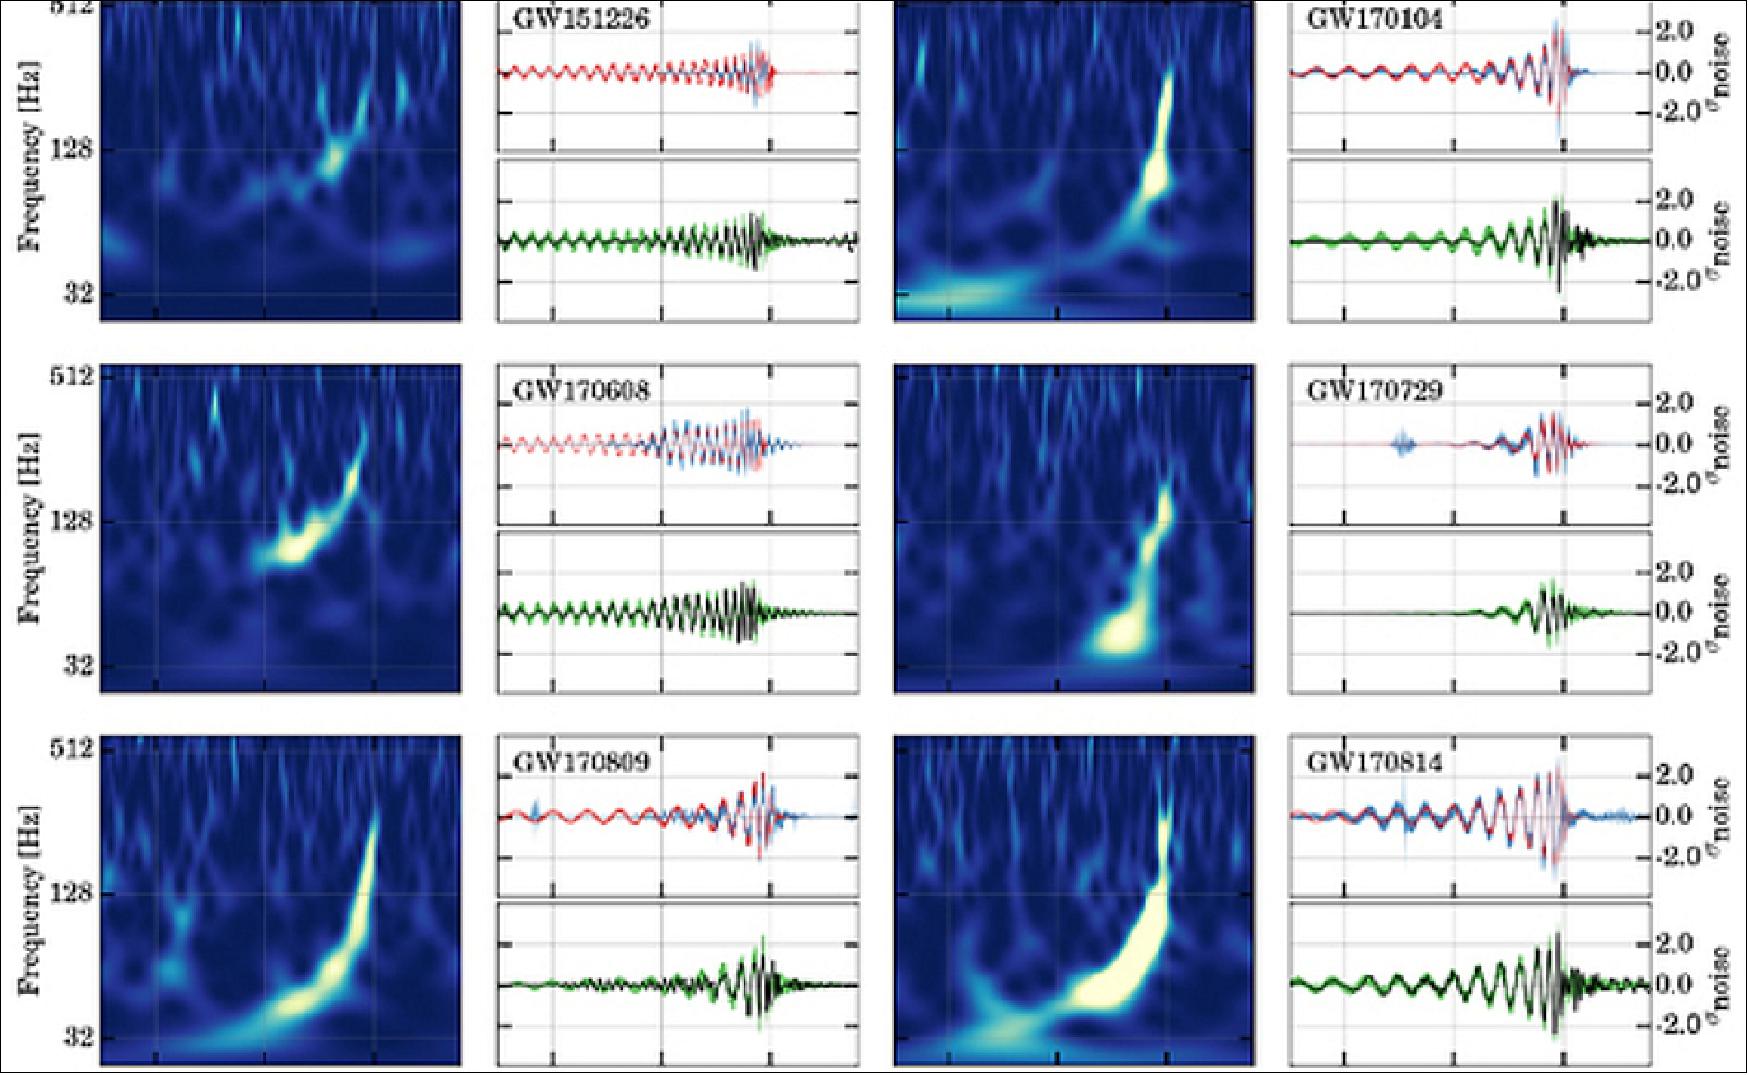 Figure 25: Time-frequency maps and reconstructed signal waveforms for the ten BBH (Binary Body Hole) events (image credit: LIGO Scientific Collaboration and the Virgo Collaboration)